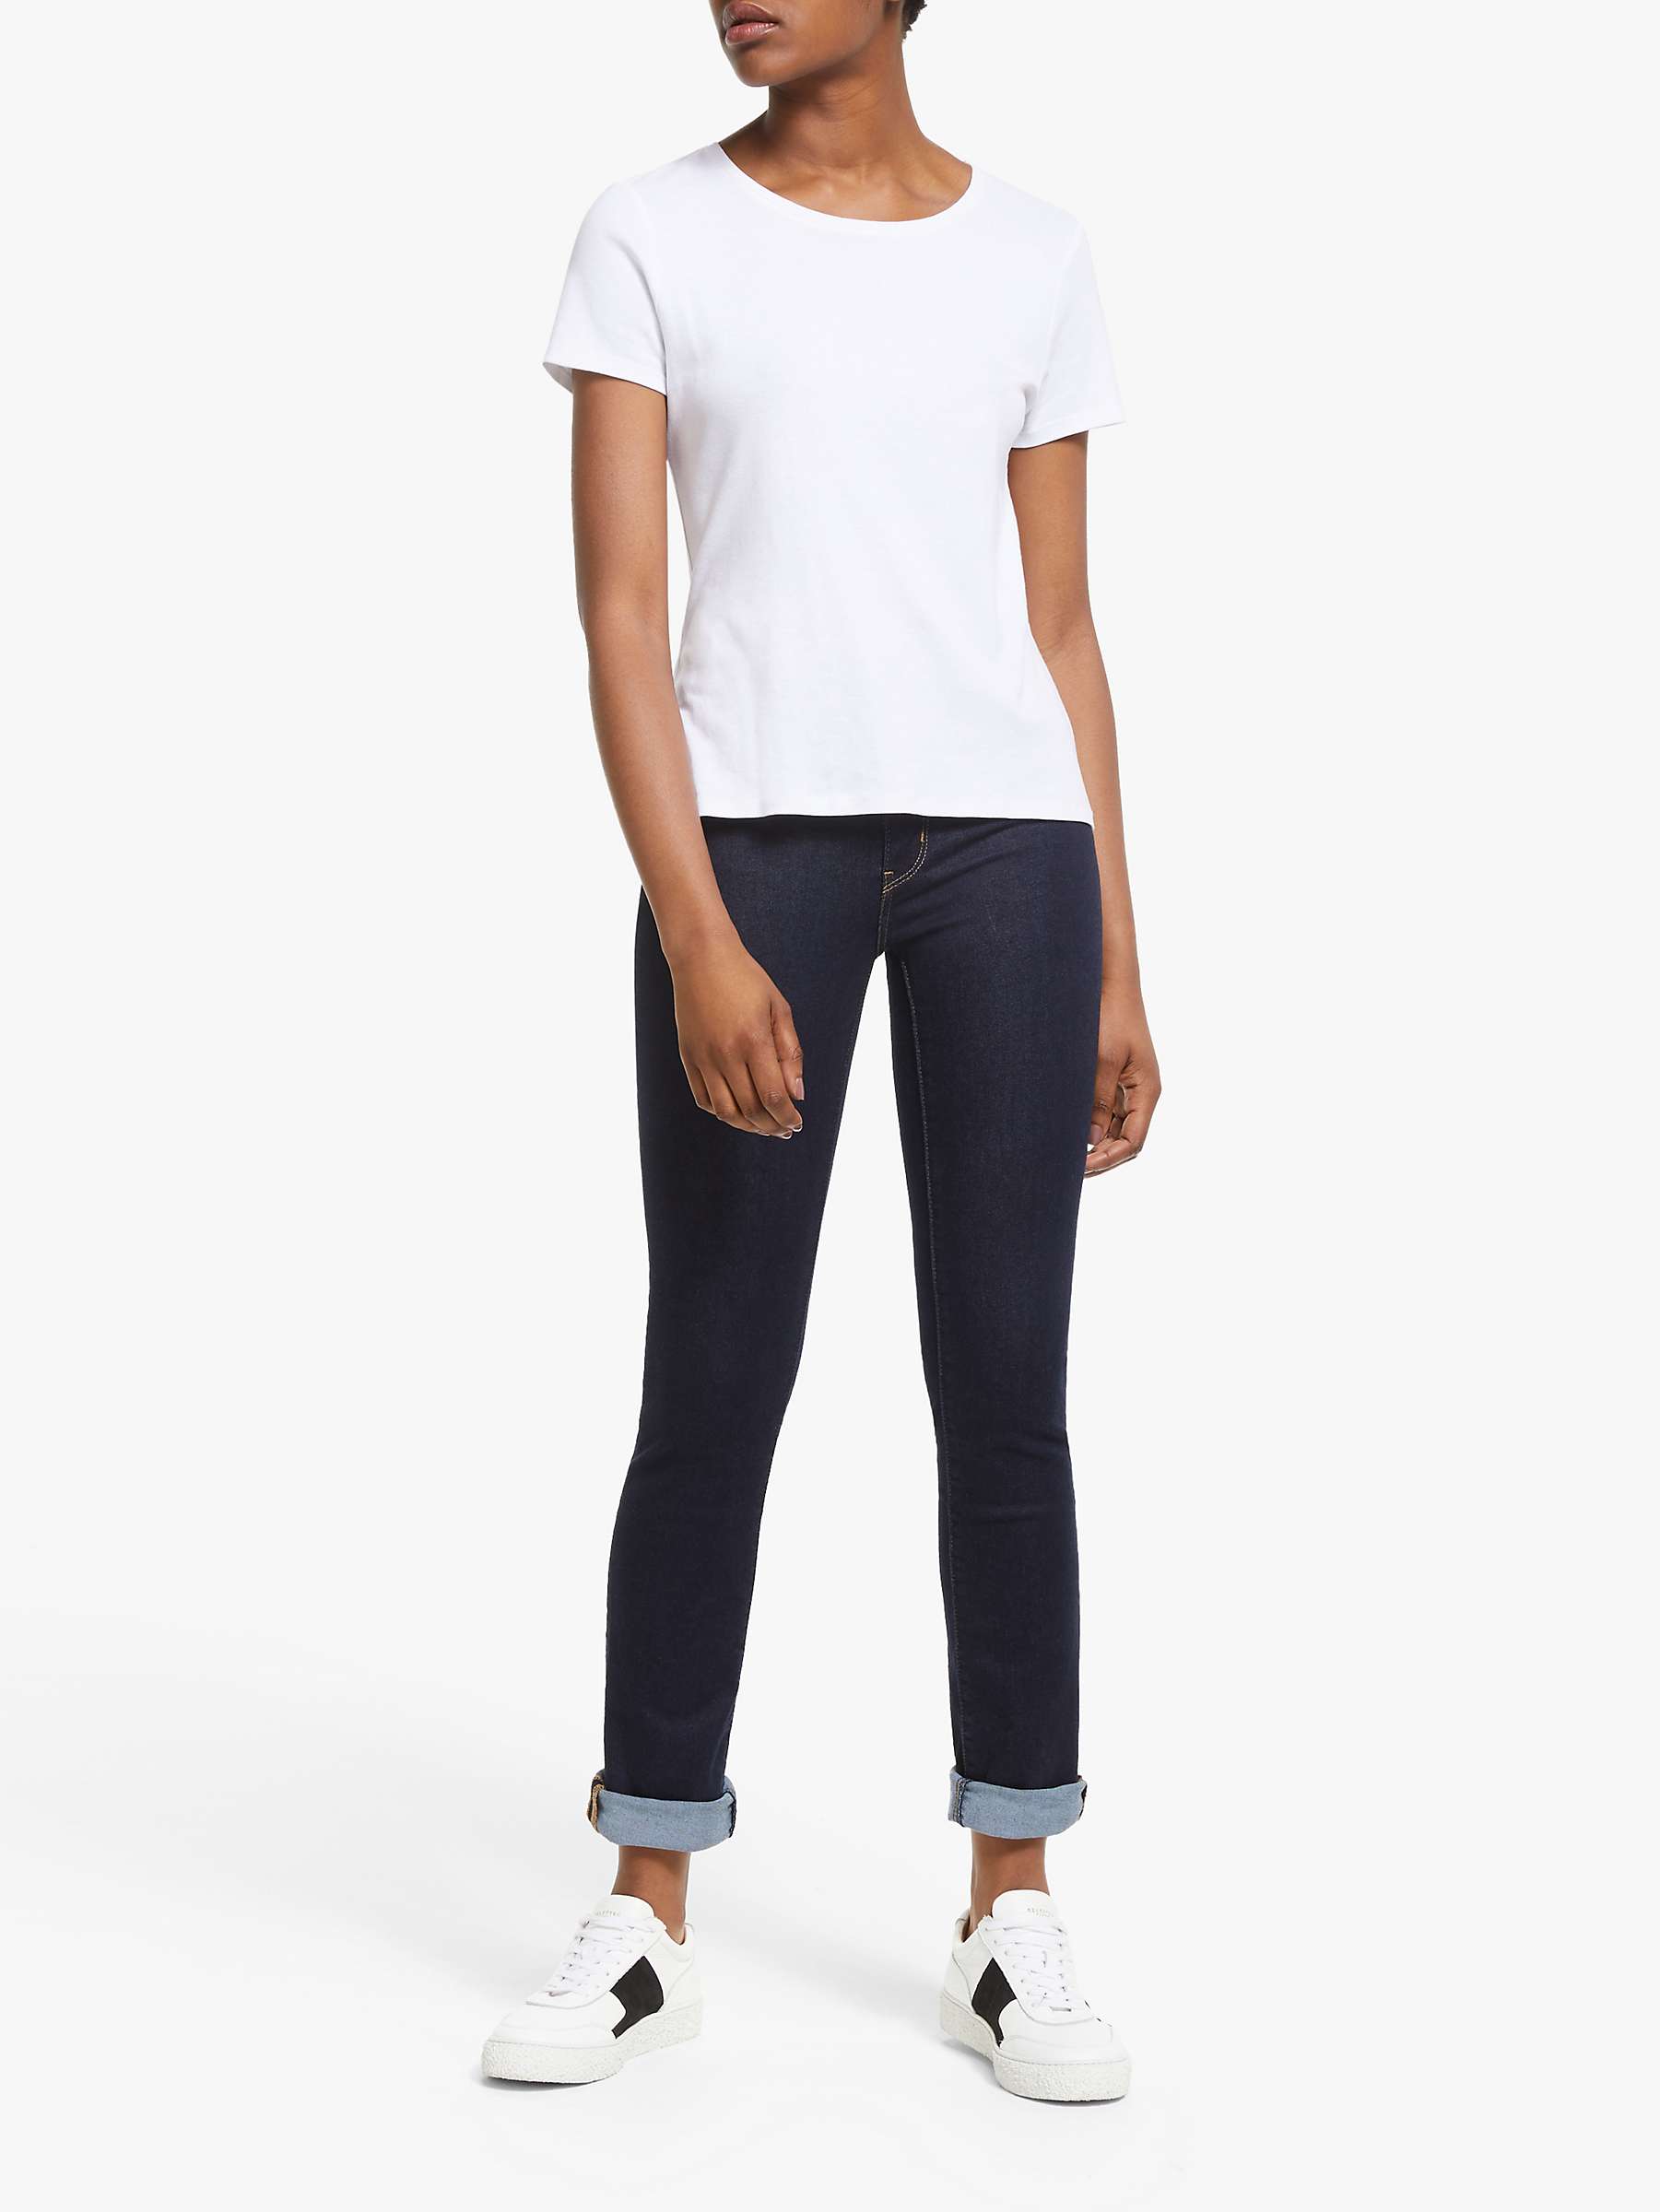 Buy Levi's 724 High Rise Straight Jeans, To The Nine Online at johnlewis.com